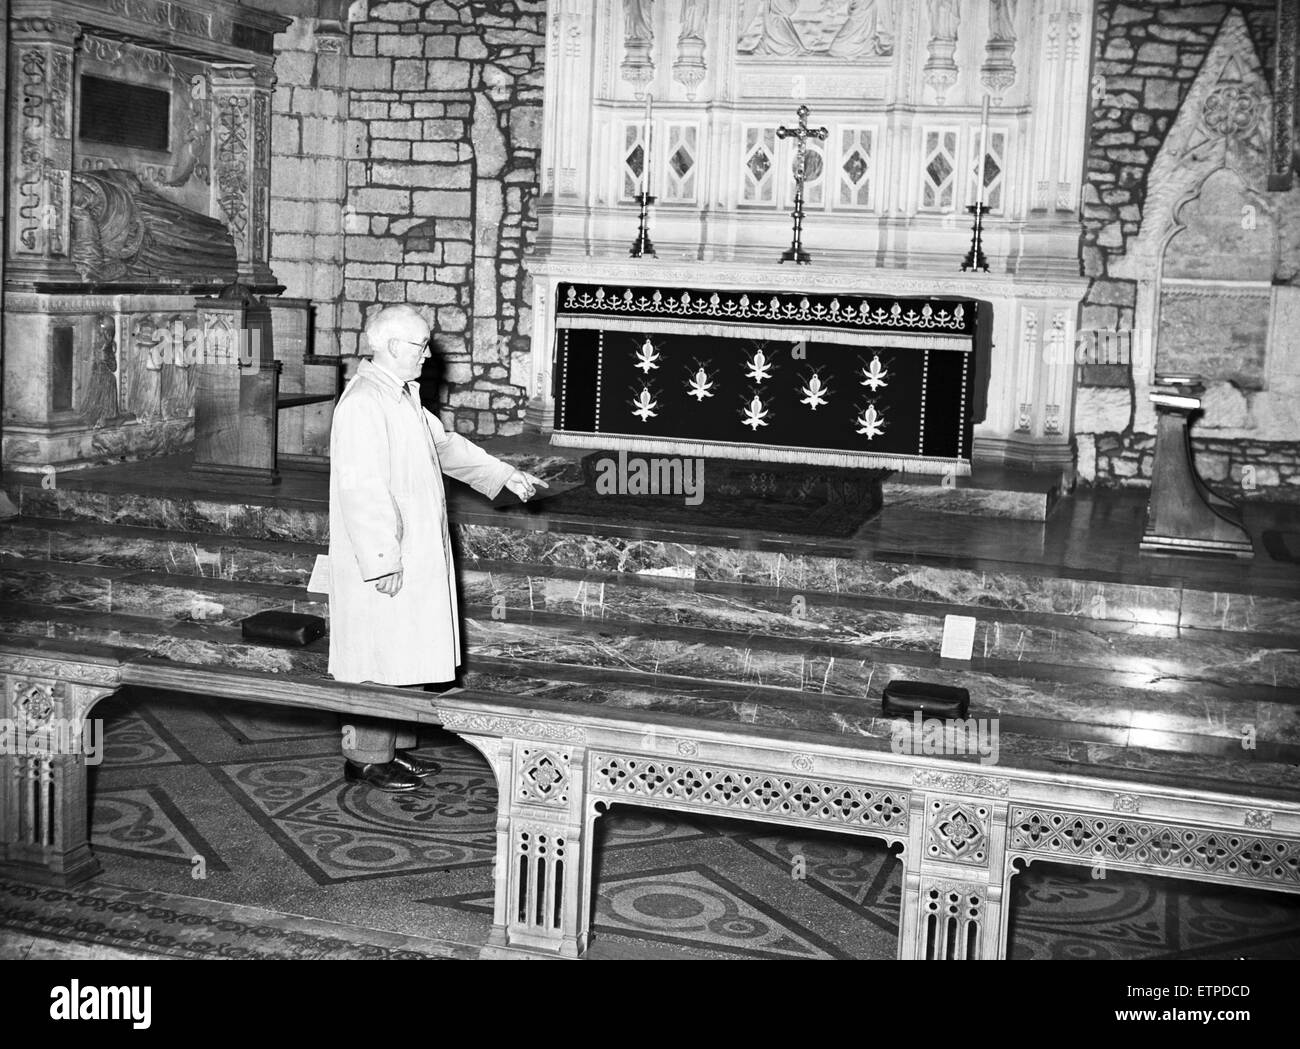 A diviner's tests have shown an indication of gold buried in Crediton Parish Church, Devon 7th December 1954. Stock Photo